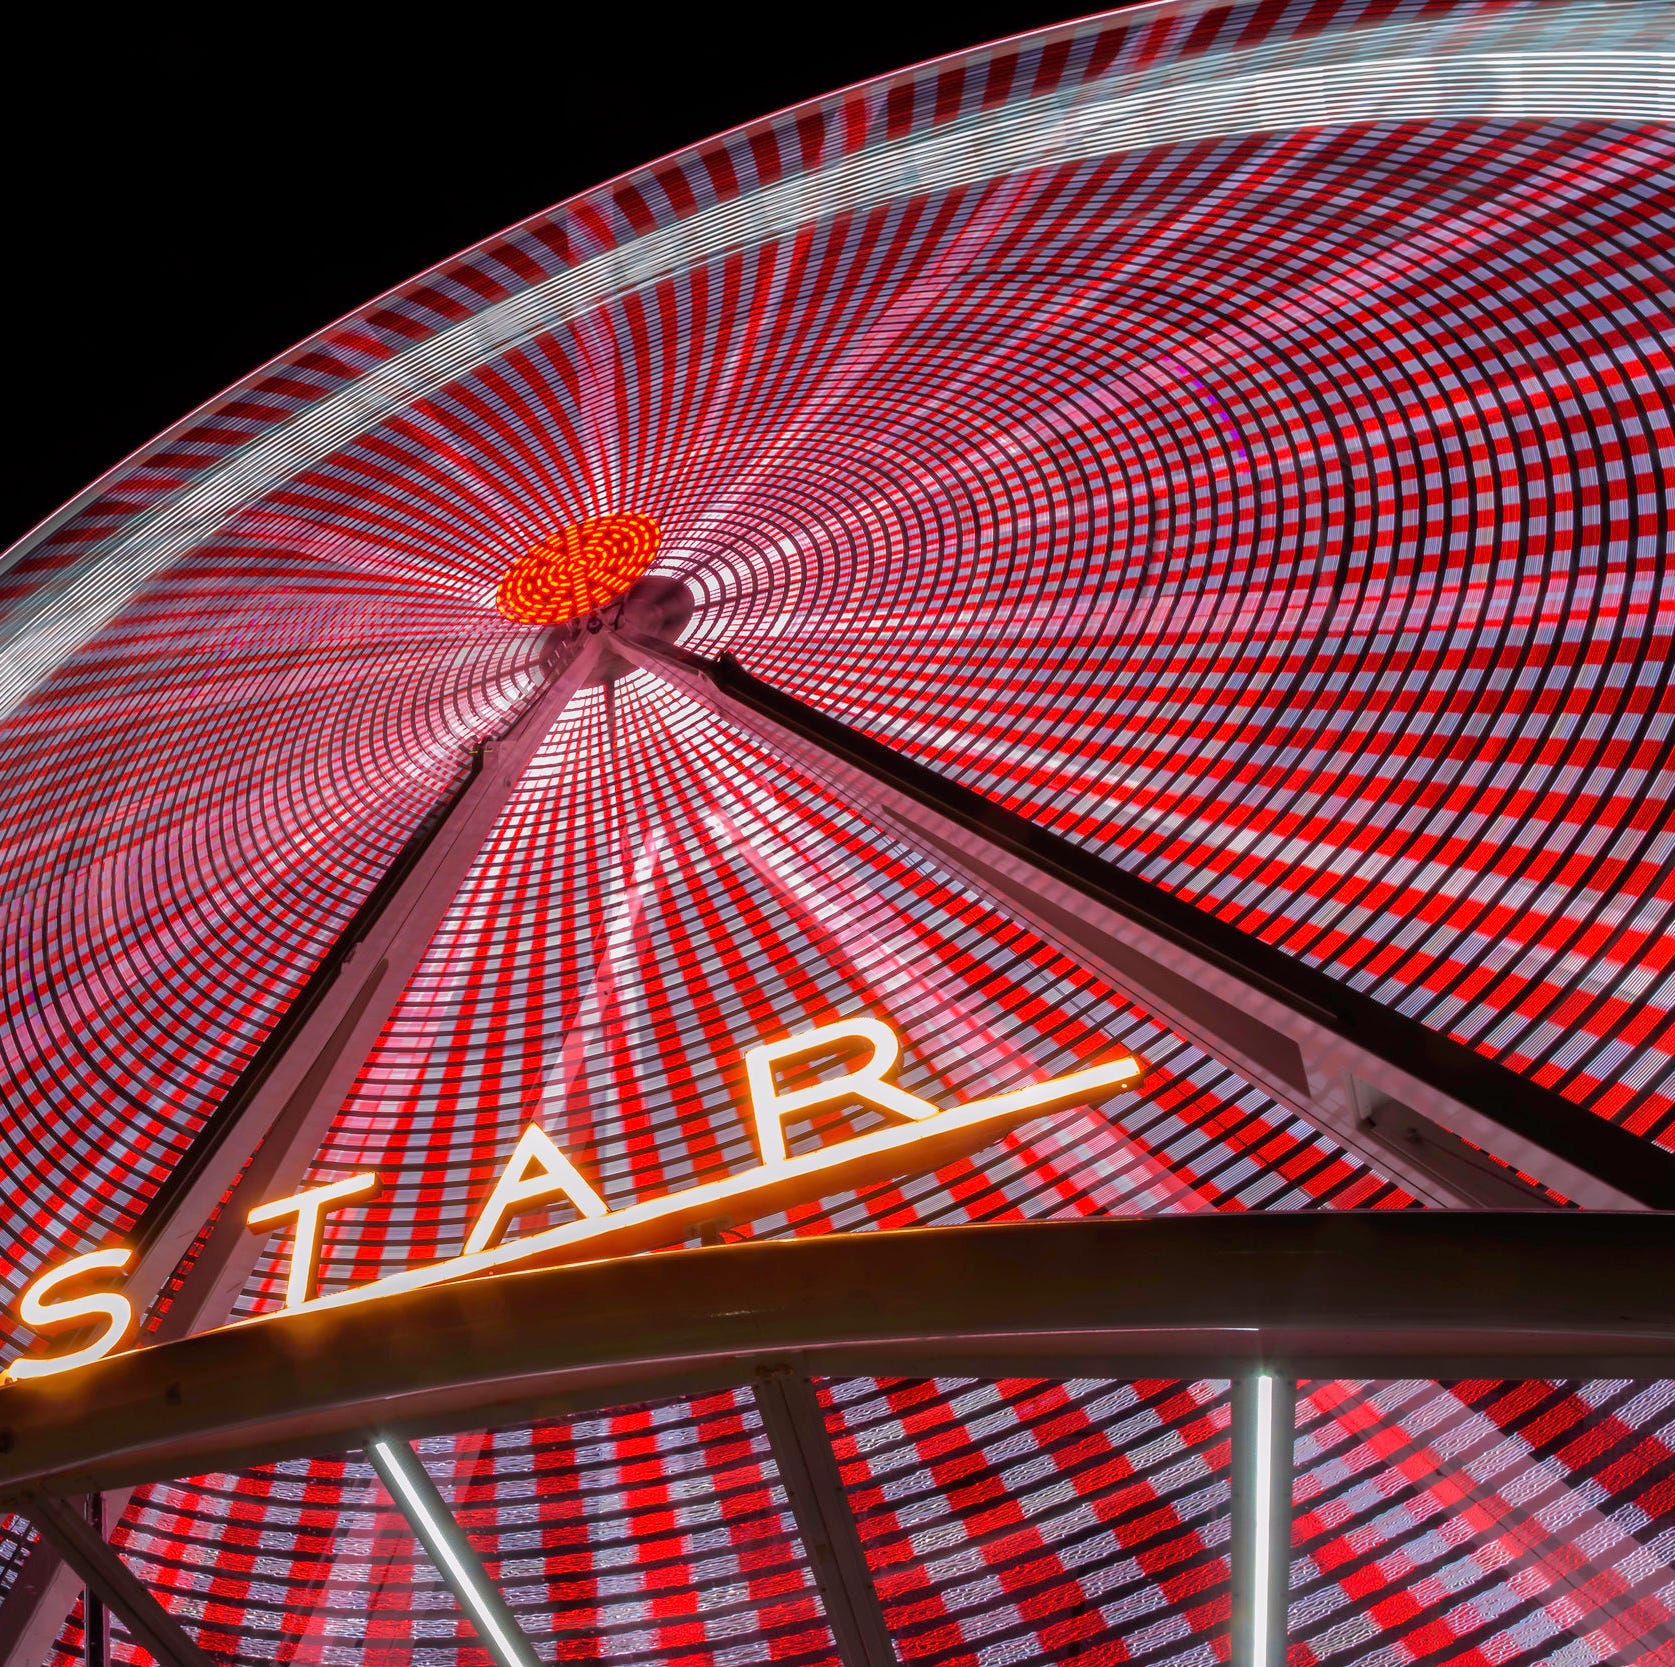 A SkyStar observation wheel will be installed at The Banks in Downtown Cincinnati on Aug. 31. It will operate daily until Dec. 2.